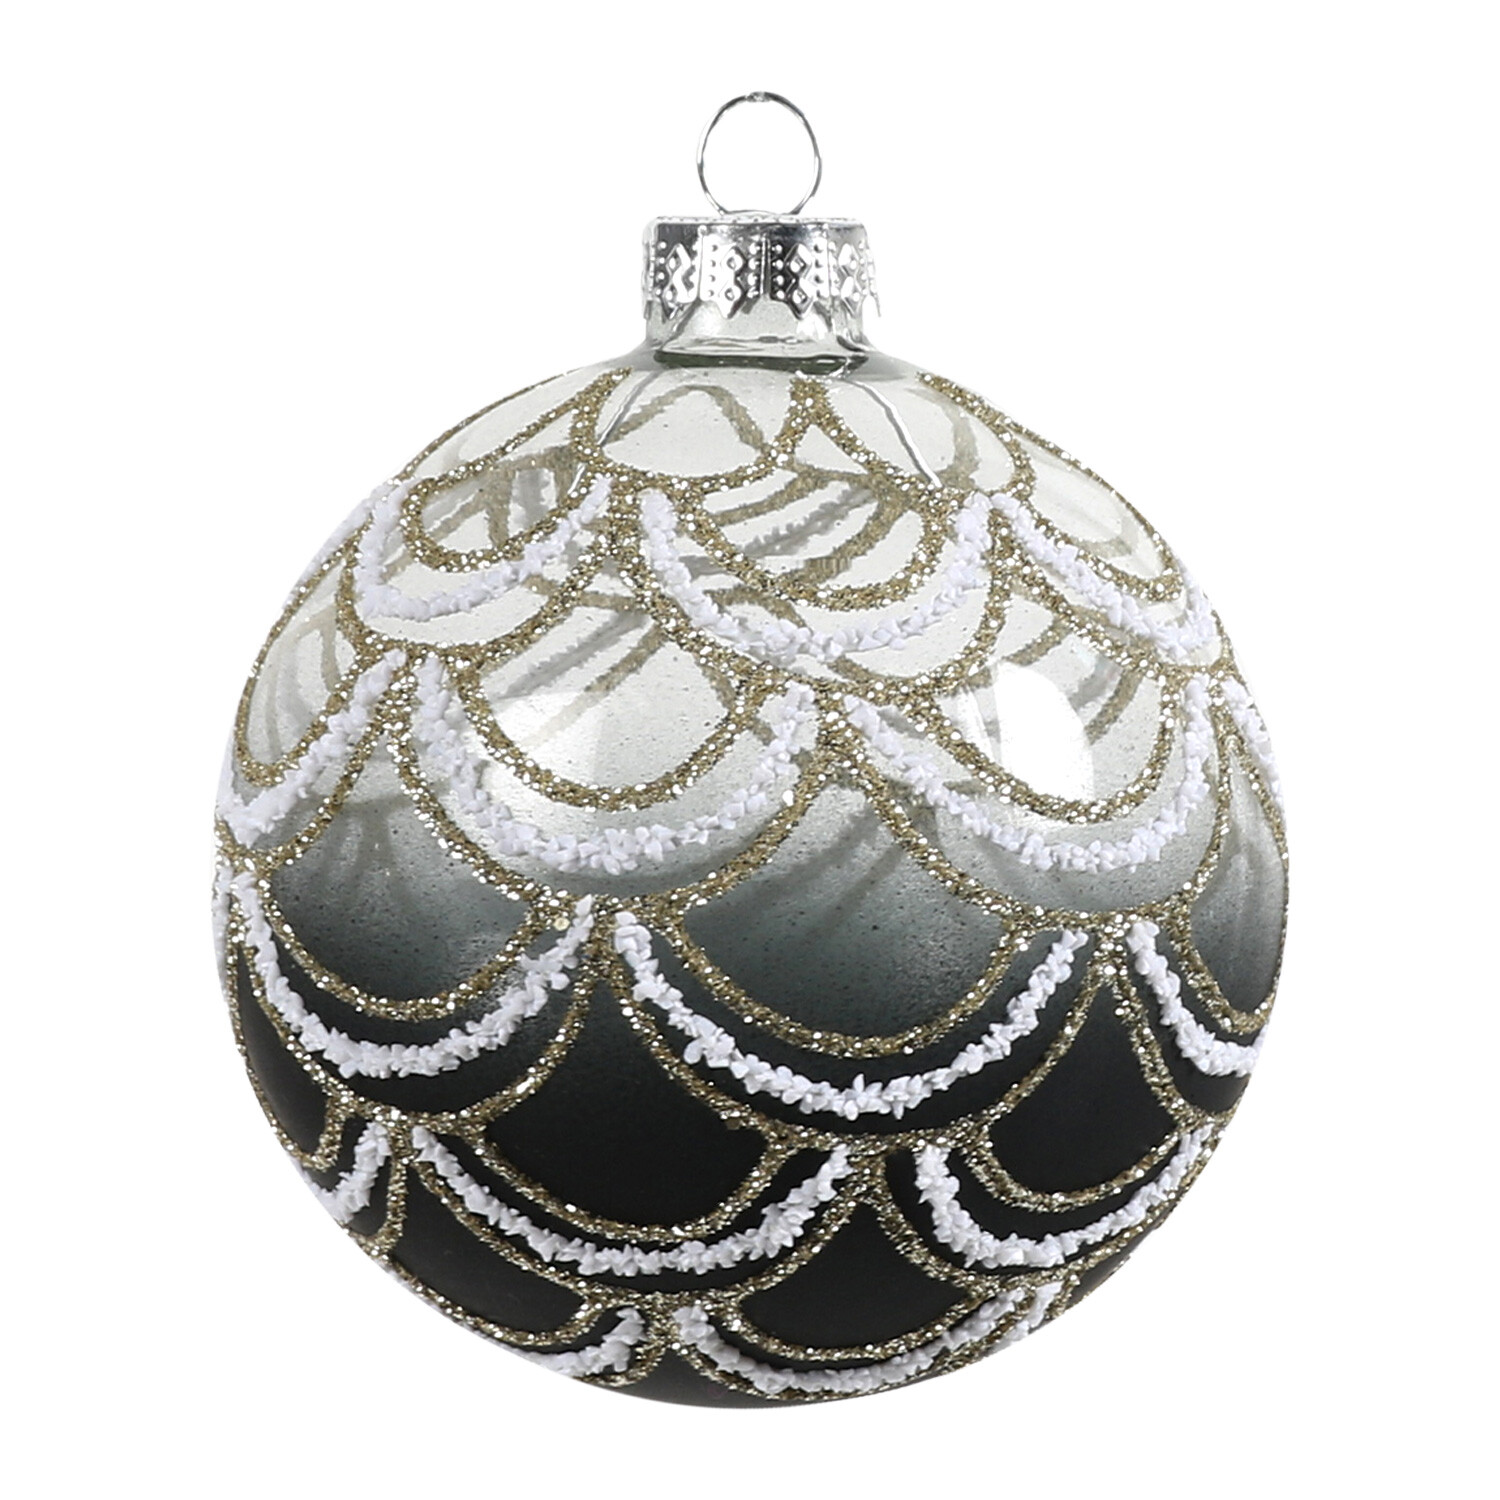 Single Chic Noir Black Beaded Design Bauble in Assorted Style Image 2